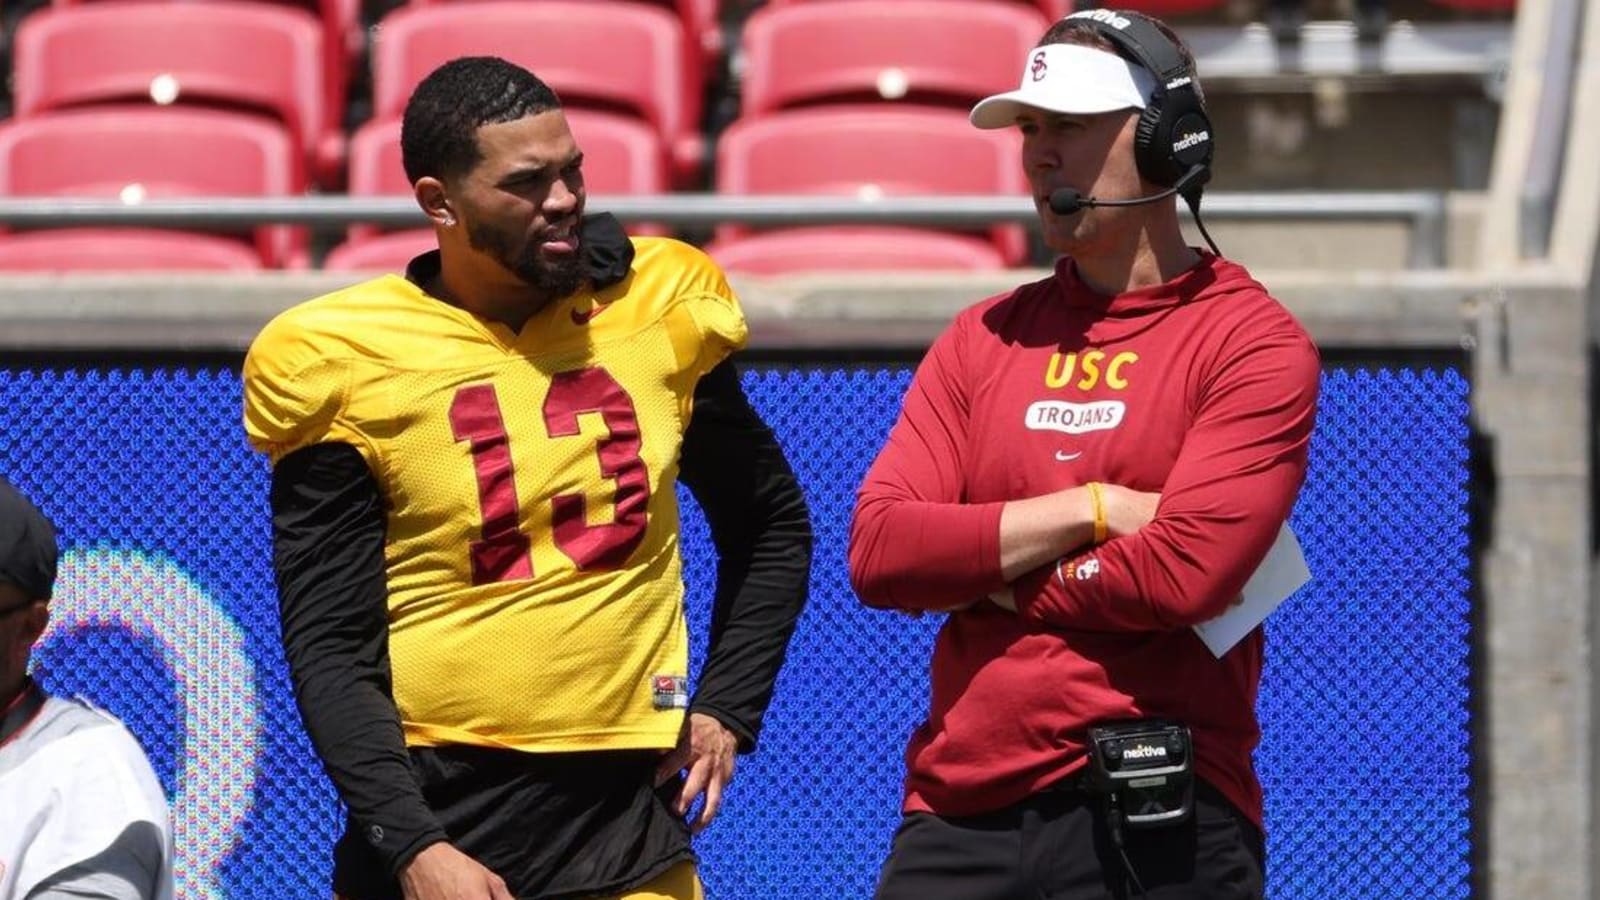 USC coach Lincoln Riley fired up for Caleb Williams, Kliff Kingsbury pairing